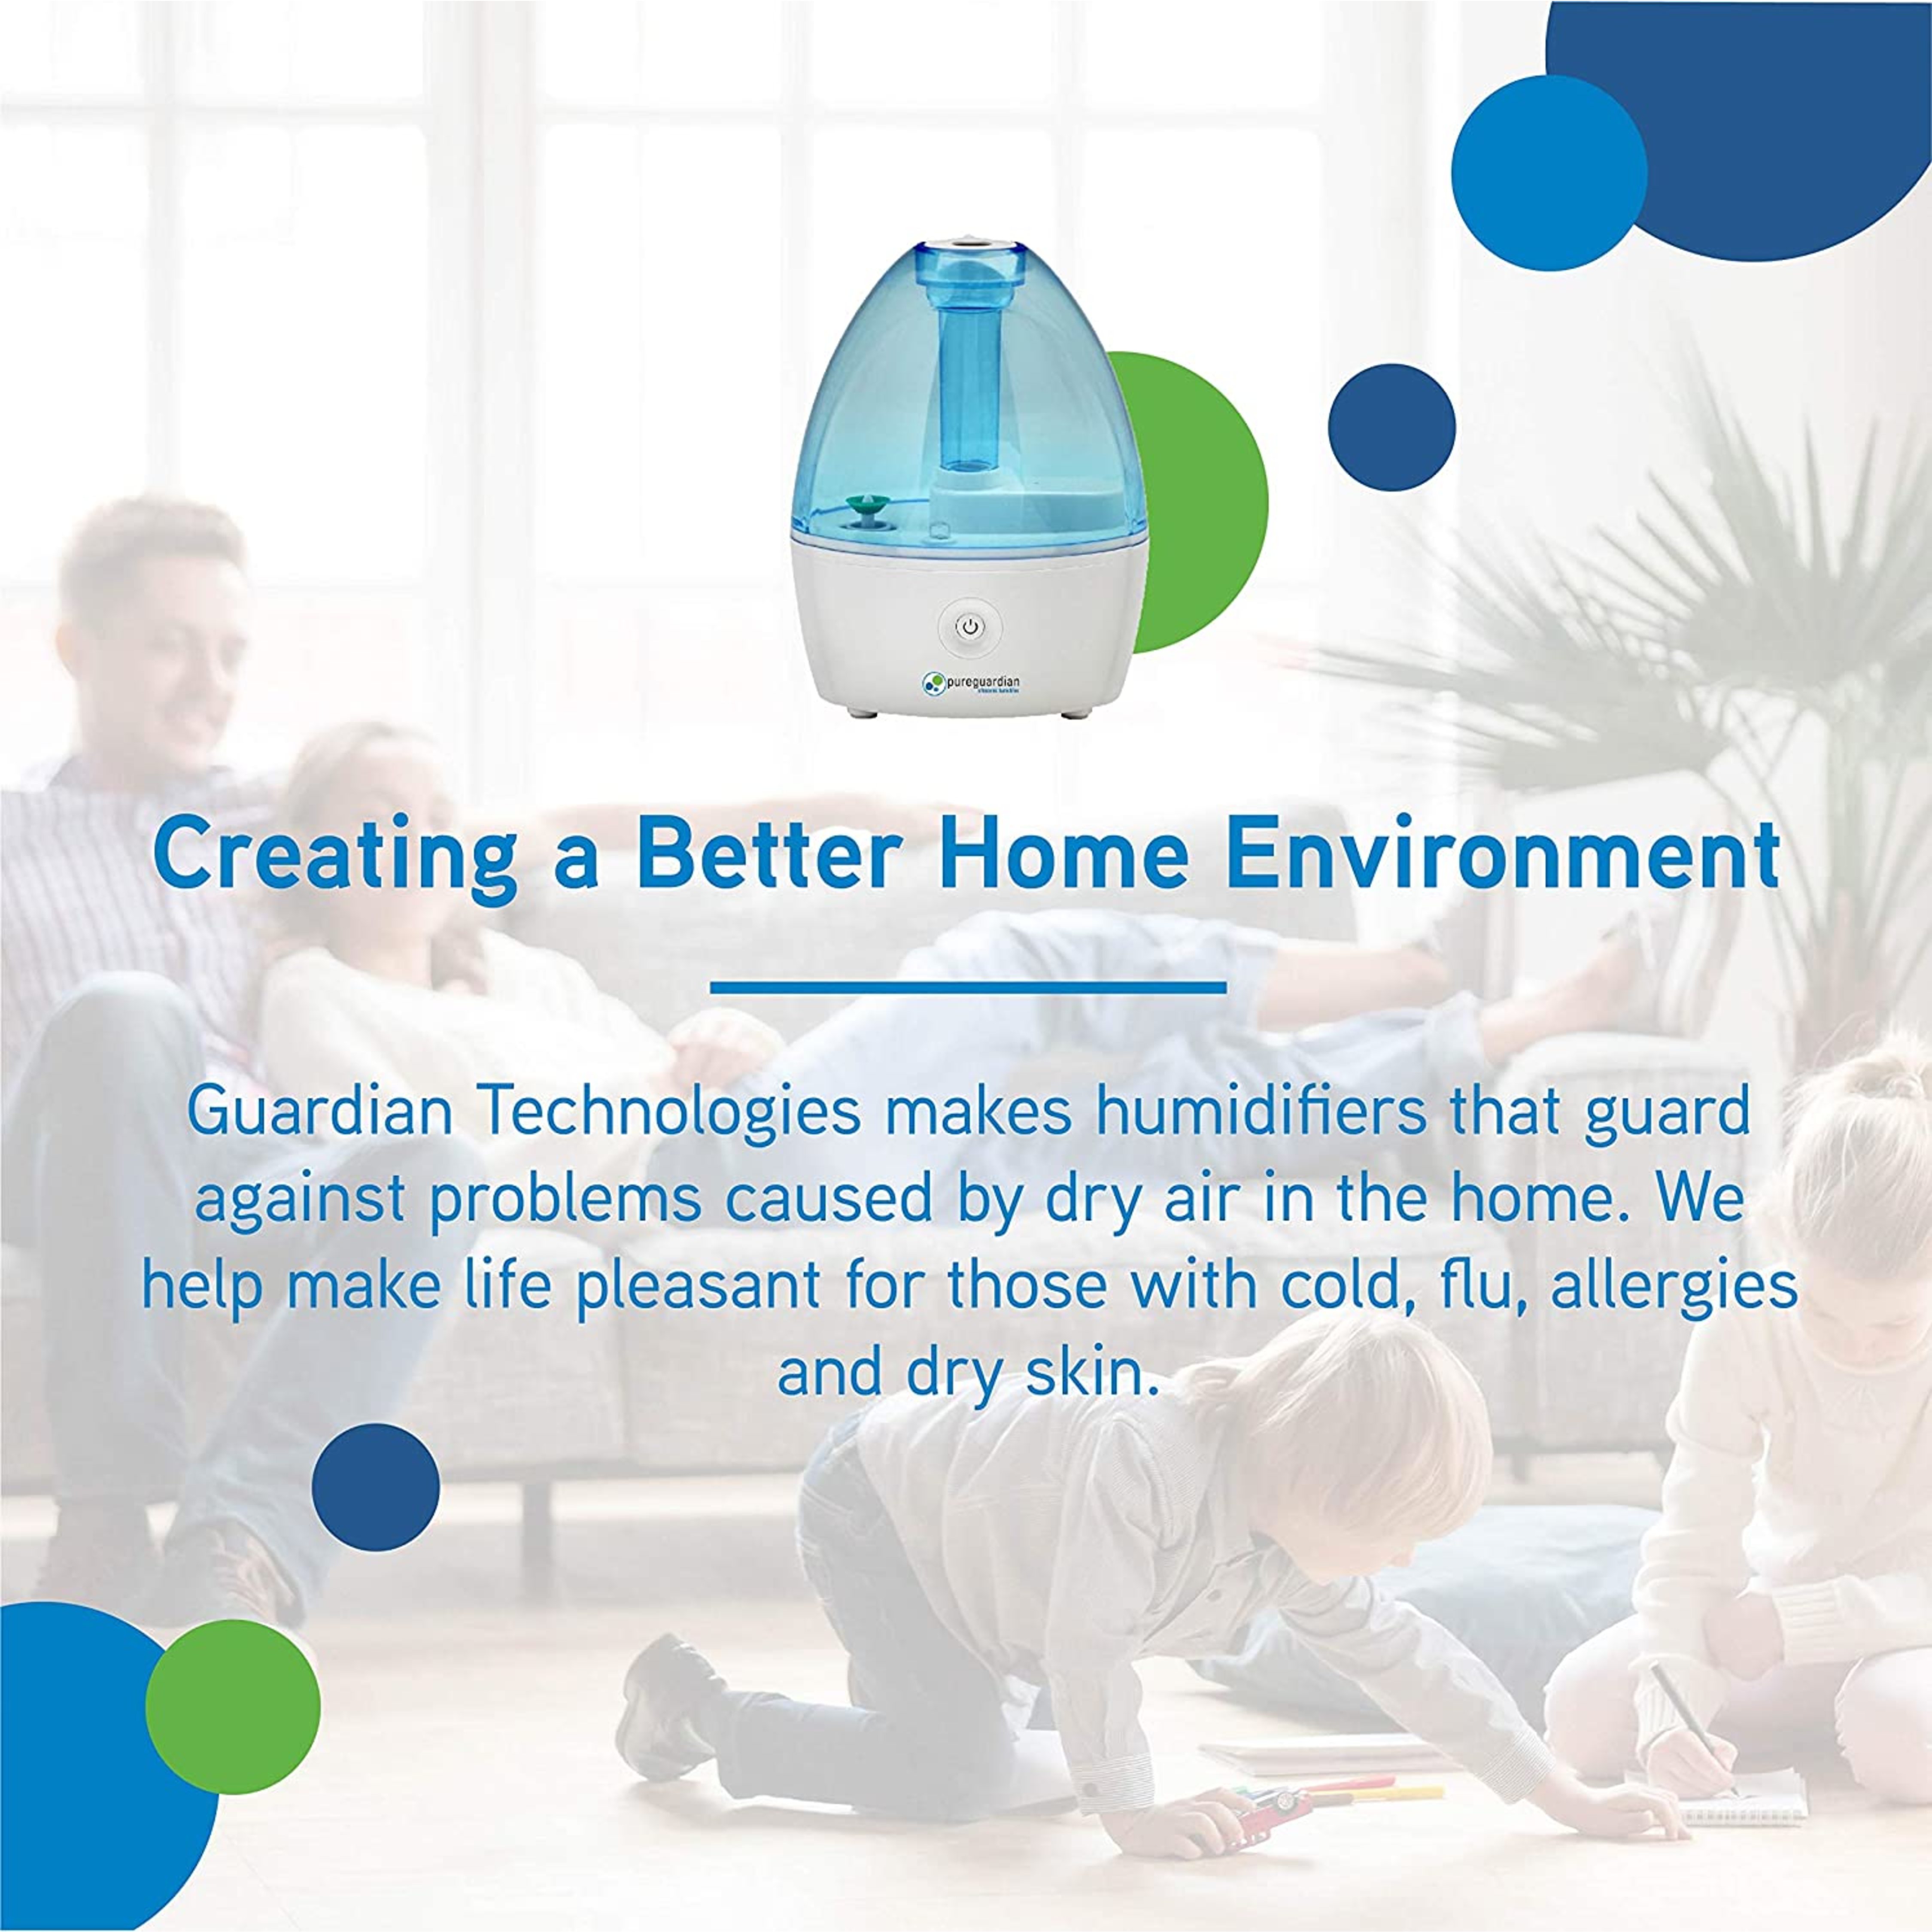 PureGuardian 0.21 Gallon 210 Sq. ft Cool Mist Ultrasonic Humidifier 14-Hour Runtime, H910BL - image 2 of 9